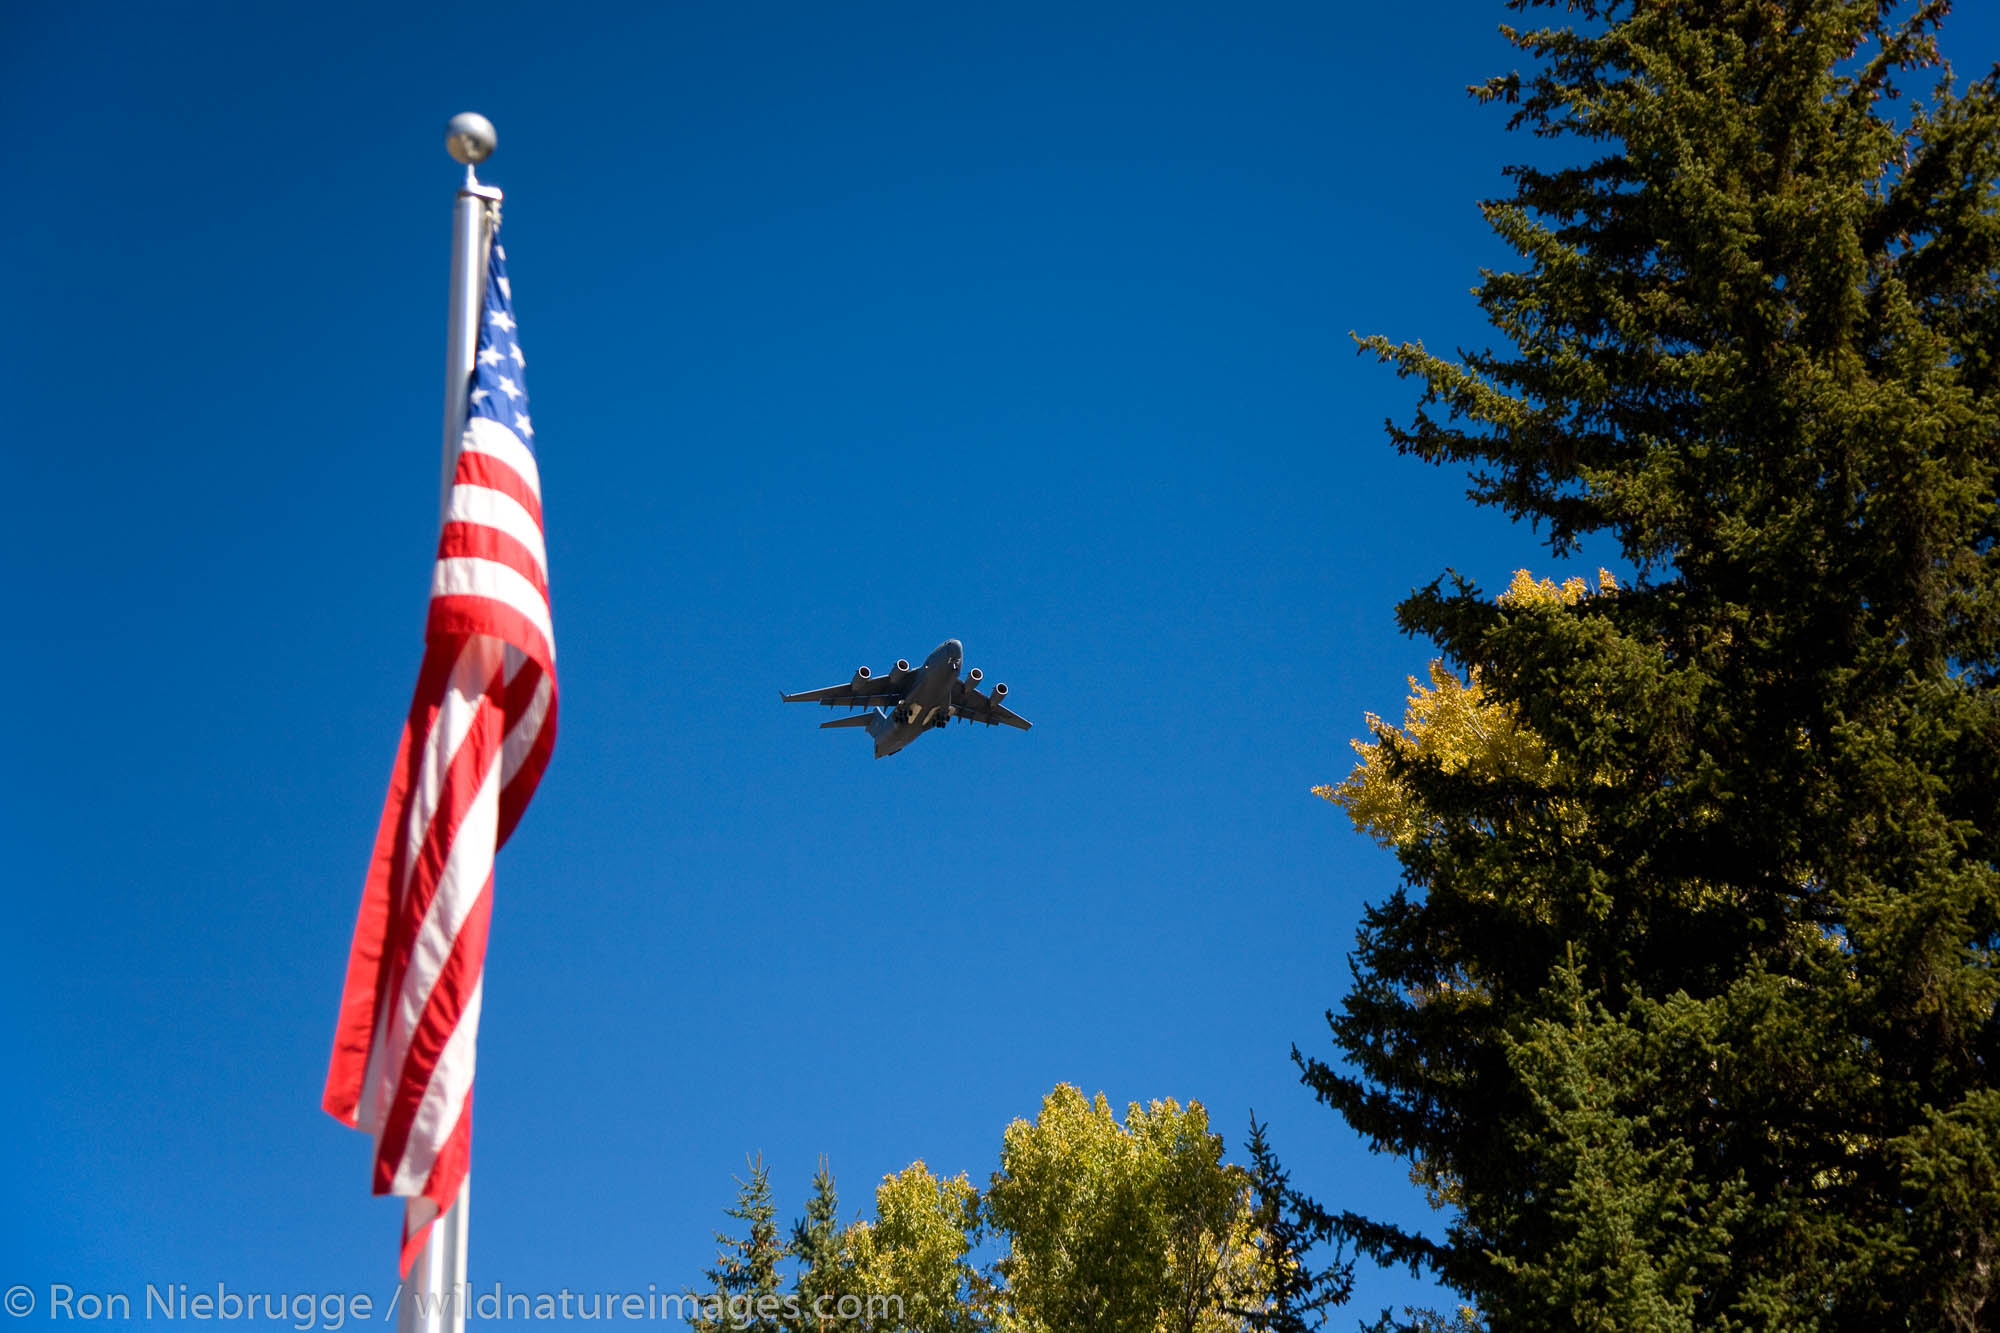 Air Force One flying over the new visitor center in Grand Teton National Park, Wyoming.